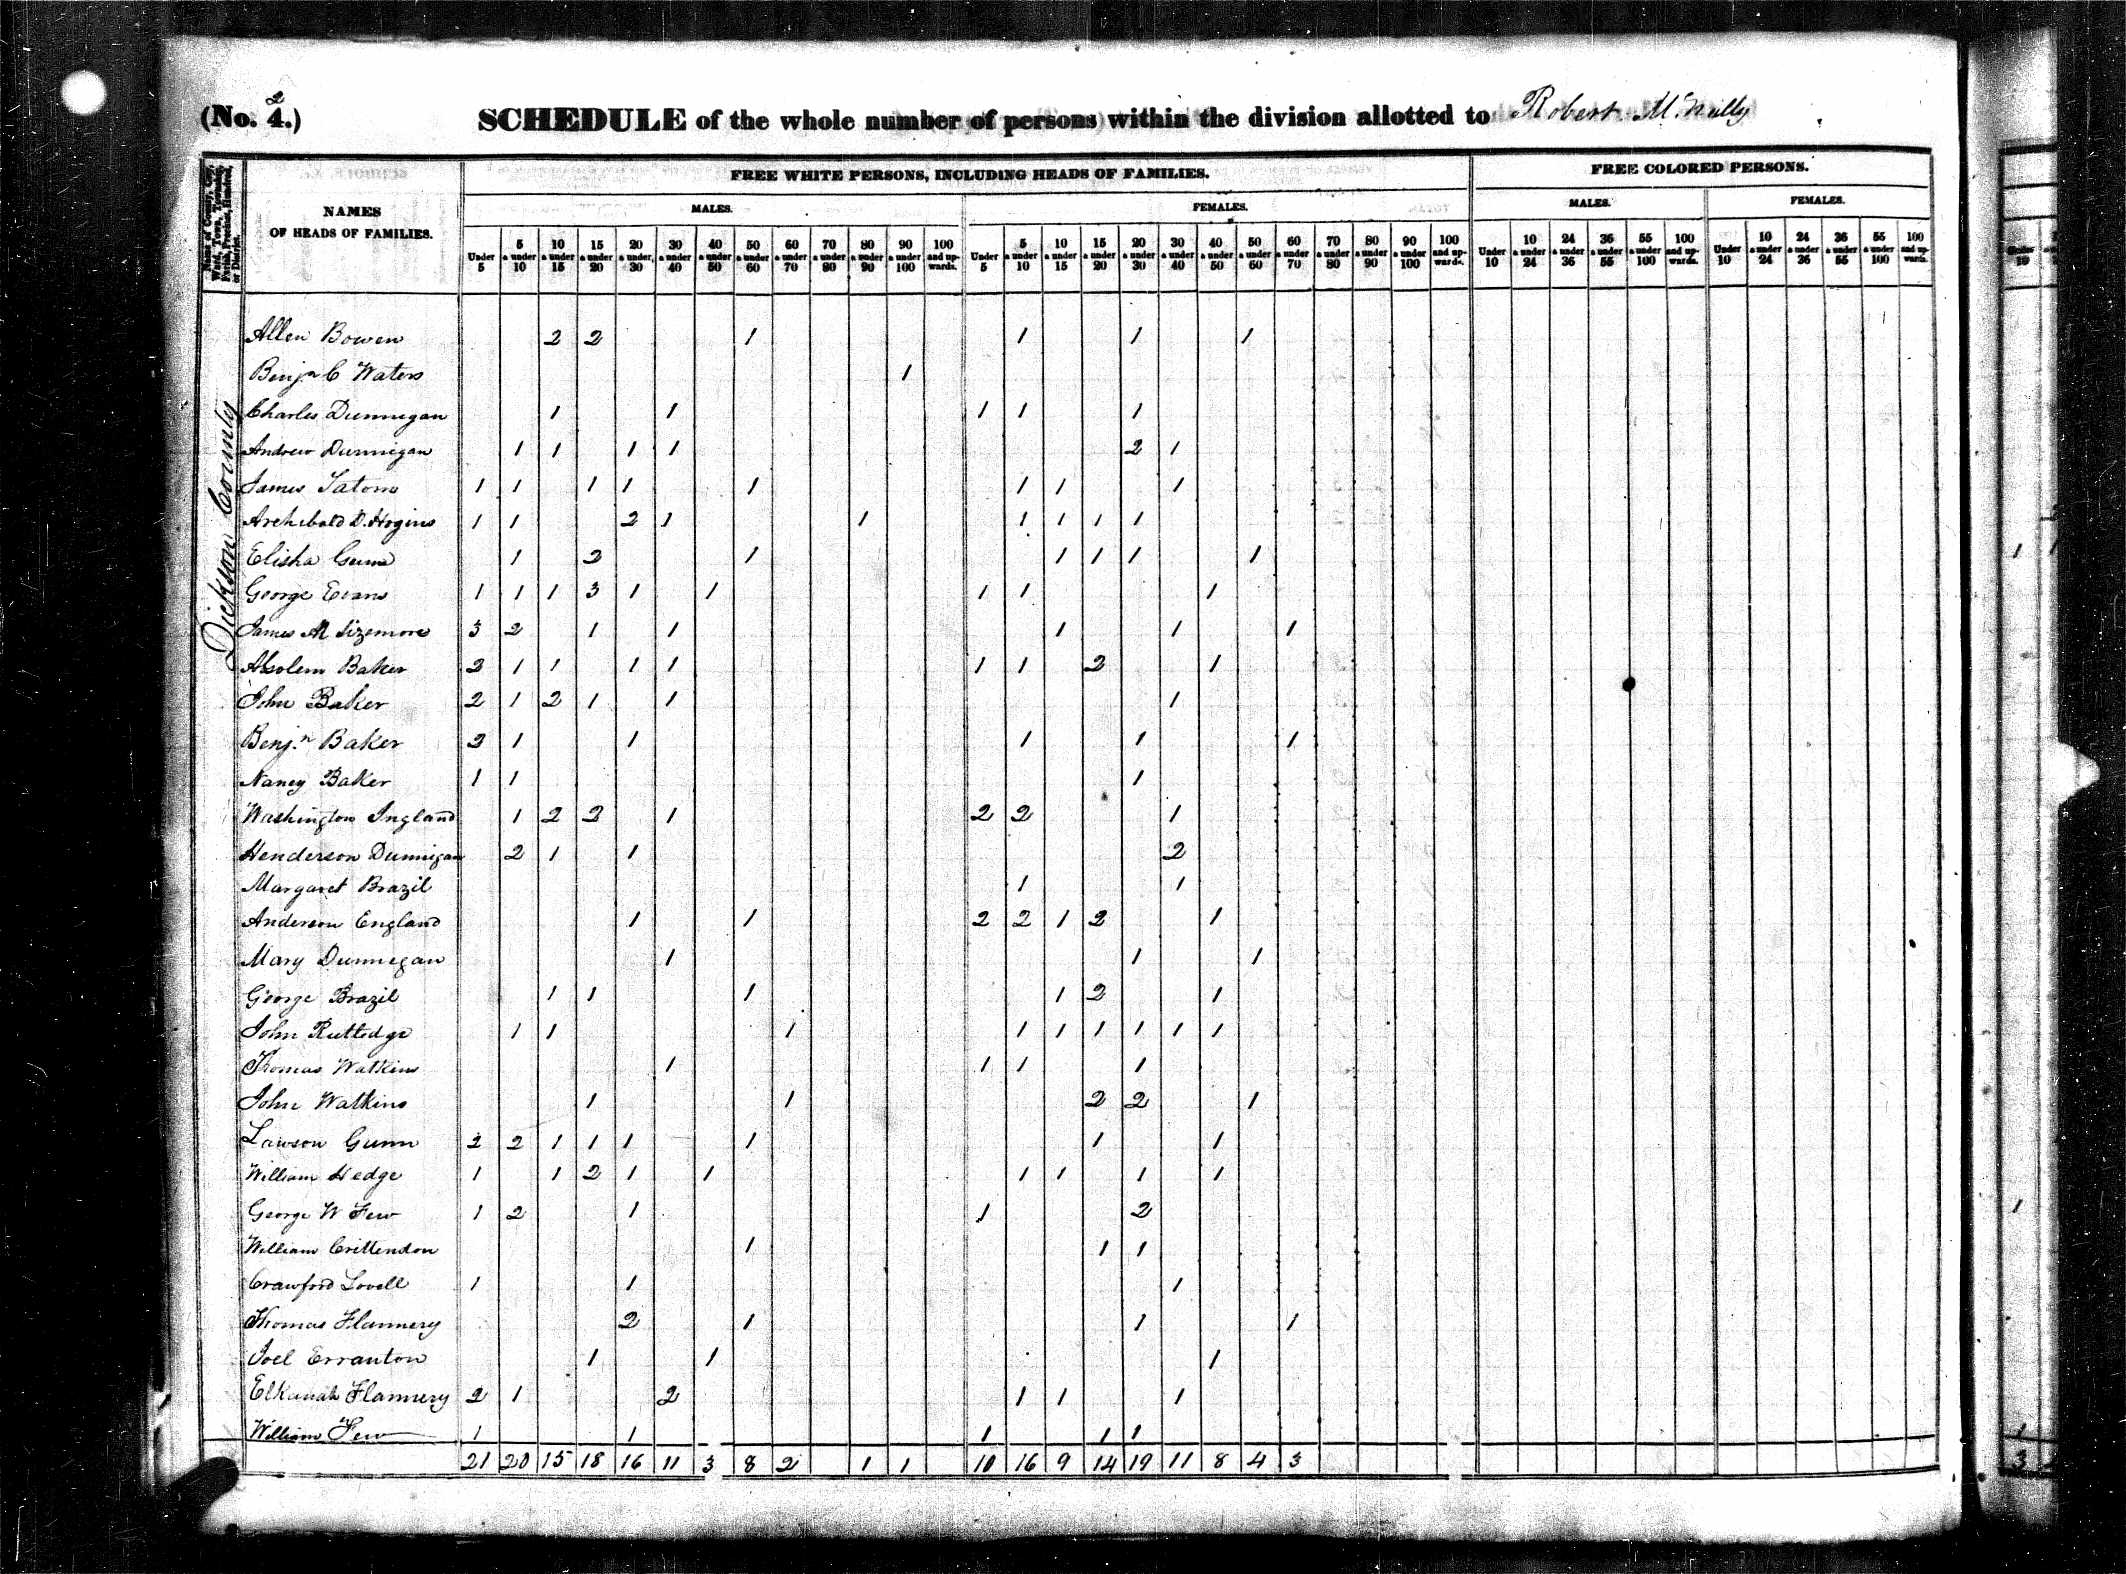 James Henderson Dunnagan, 1840 Dickson County, Tennessee, census